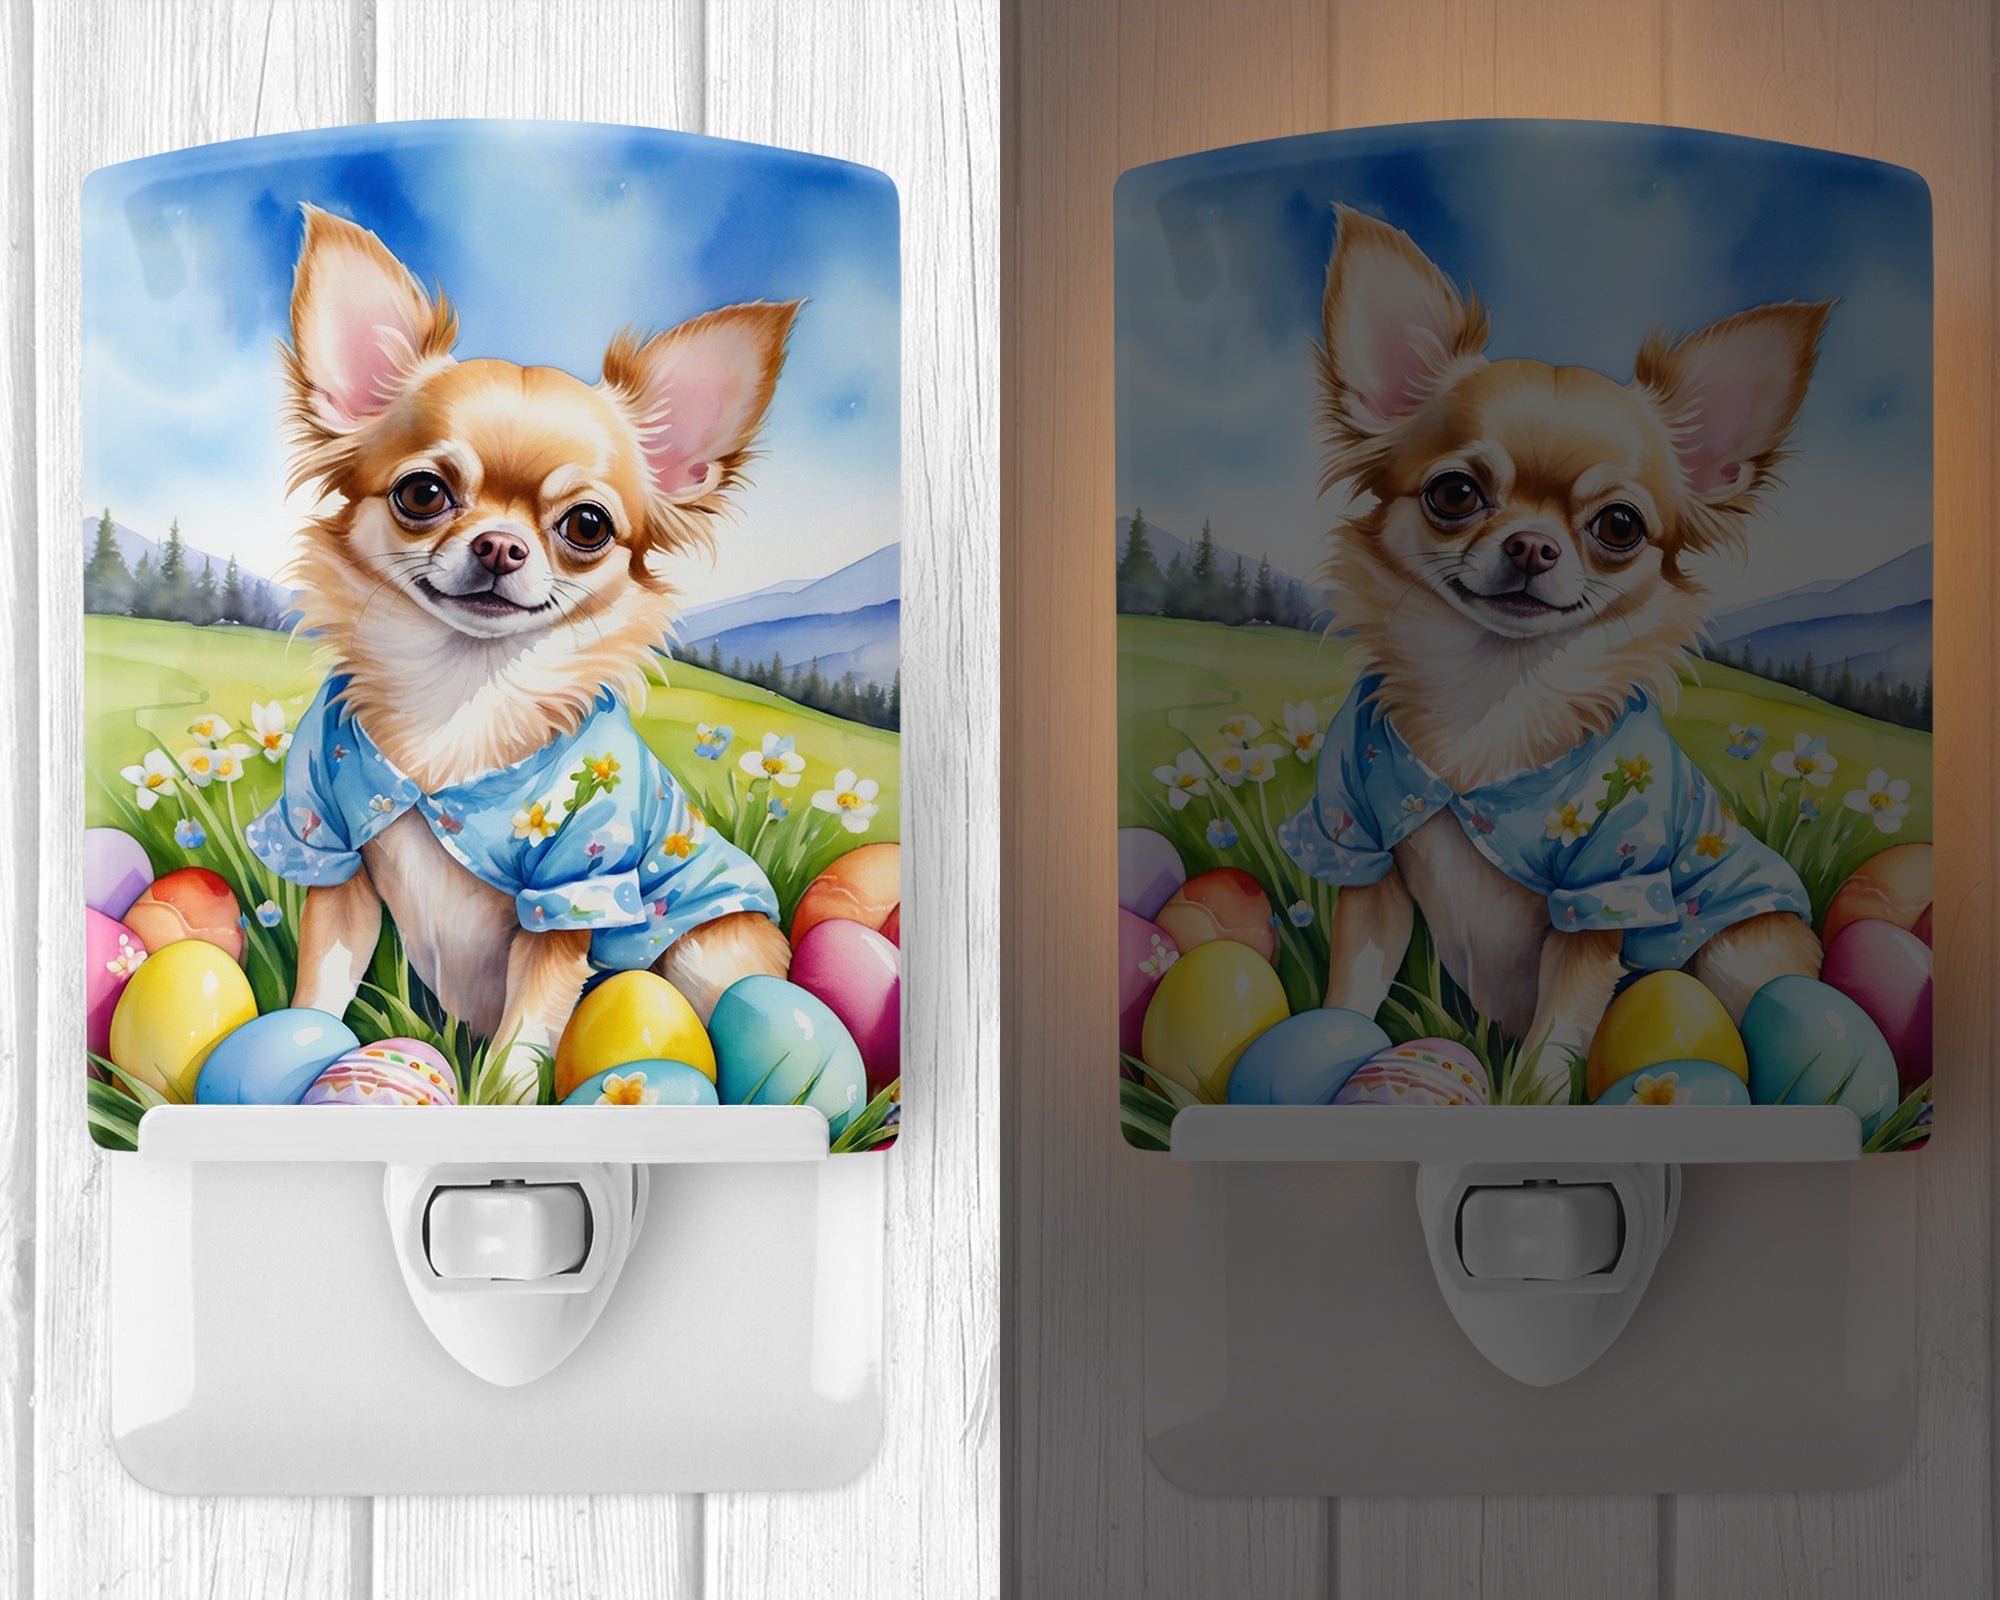 Buy this Chihuahua Easter Egg Hunt Ceramic Night Light